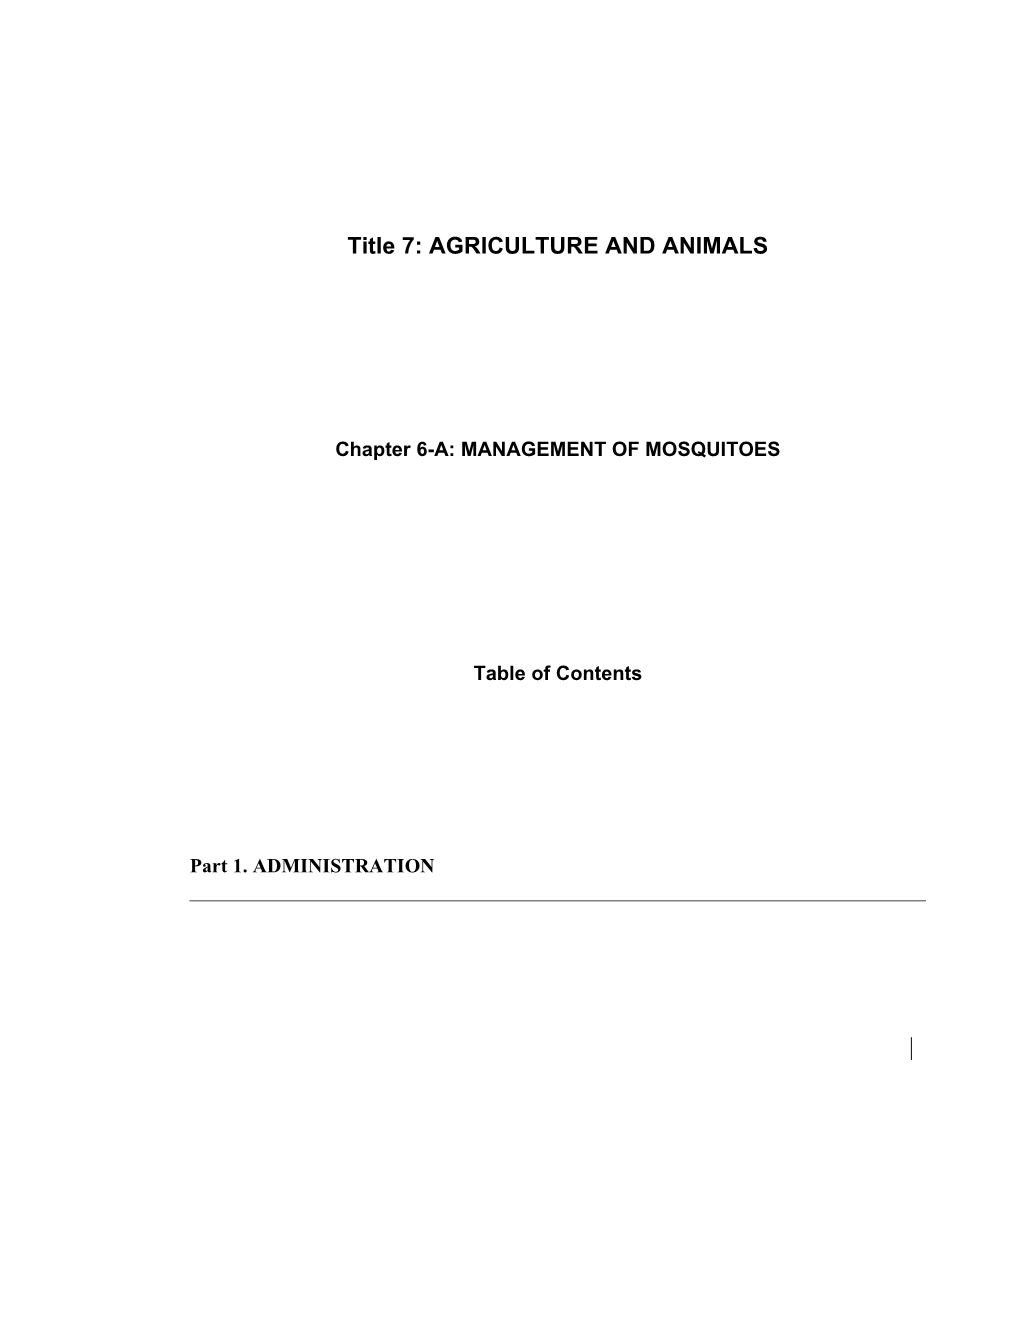 MRS Title 7, Chapter 6-A: MANAGEMENT of MOSQUITOES